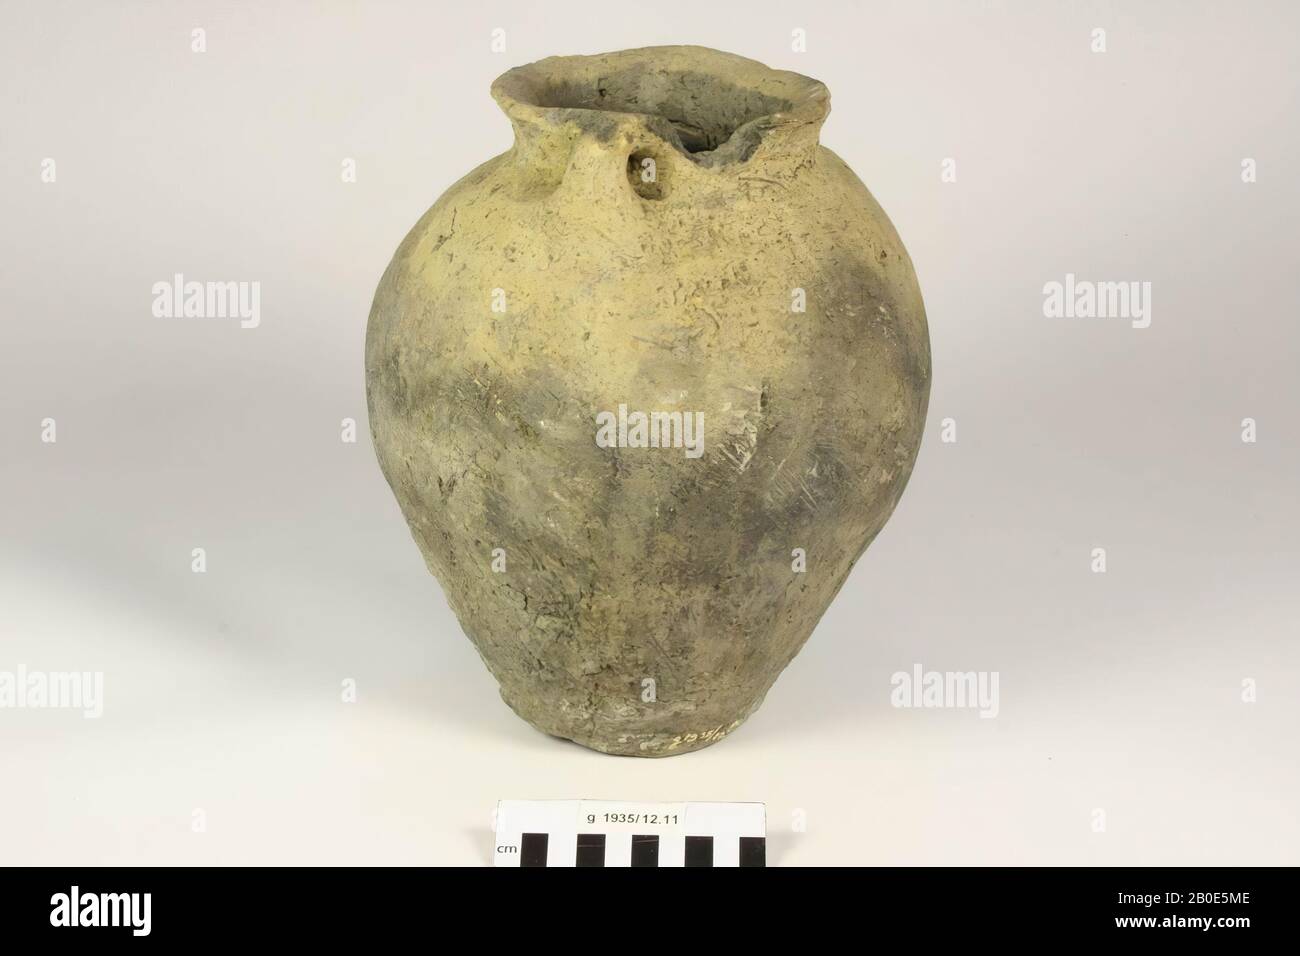 Pot of coarse so-called Frisian earthenware with two ears and serrated edge. Found in pit I. With cracks in the wall, a crack in the edge, a lacuna in the edge and a damaged surface., Pot, earthenware, h: 27 cm, diam: 22.5 cm, roman, Netherlands, North Holland, Schagen, Schagen Stock Photo